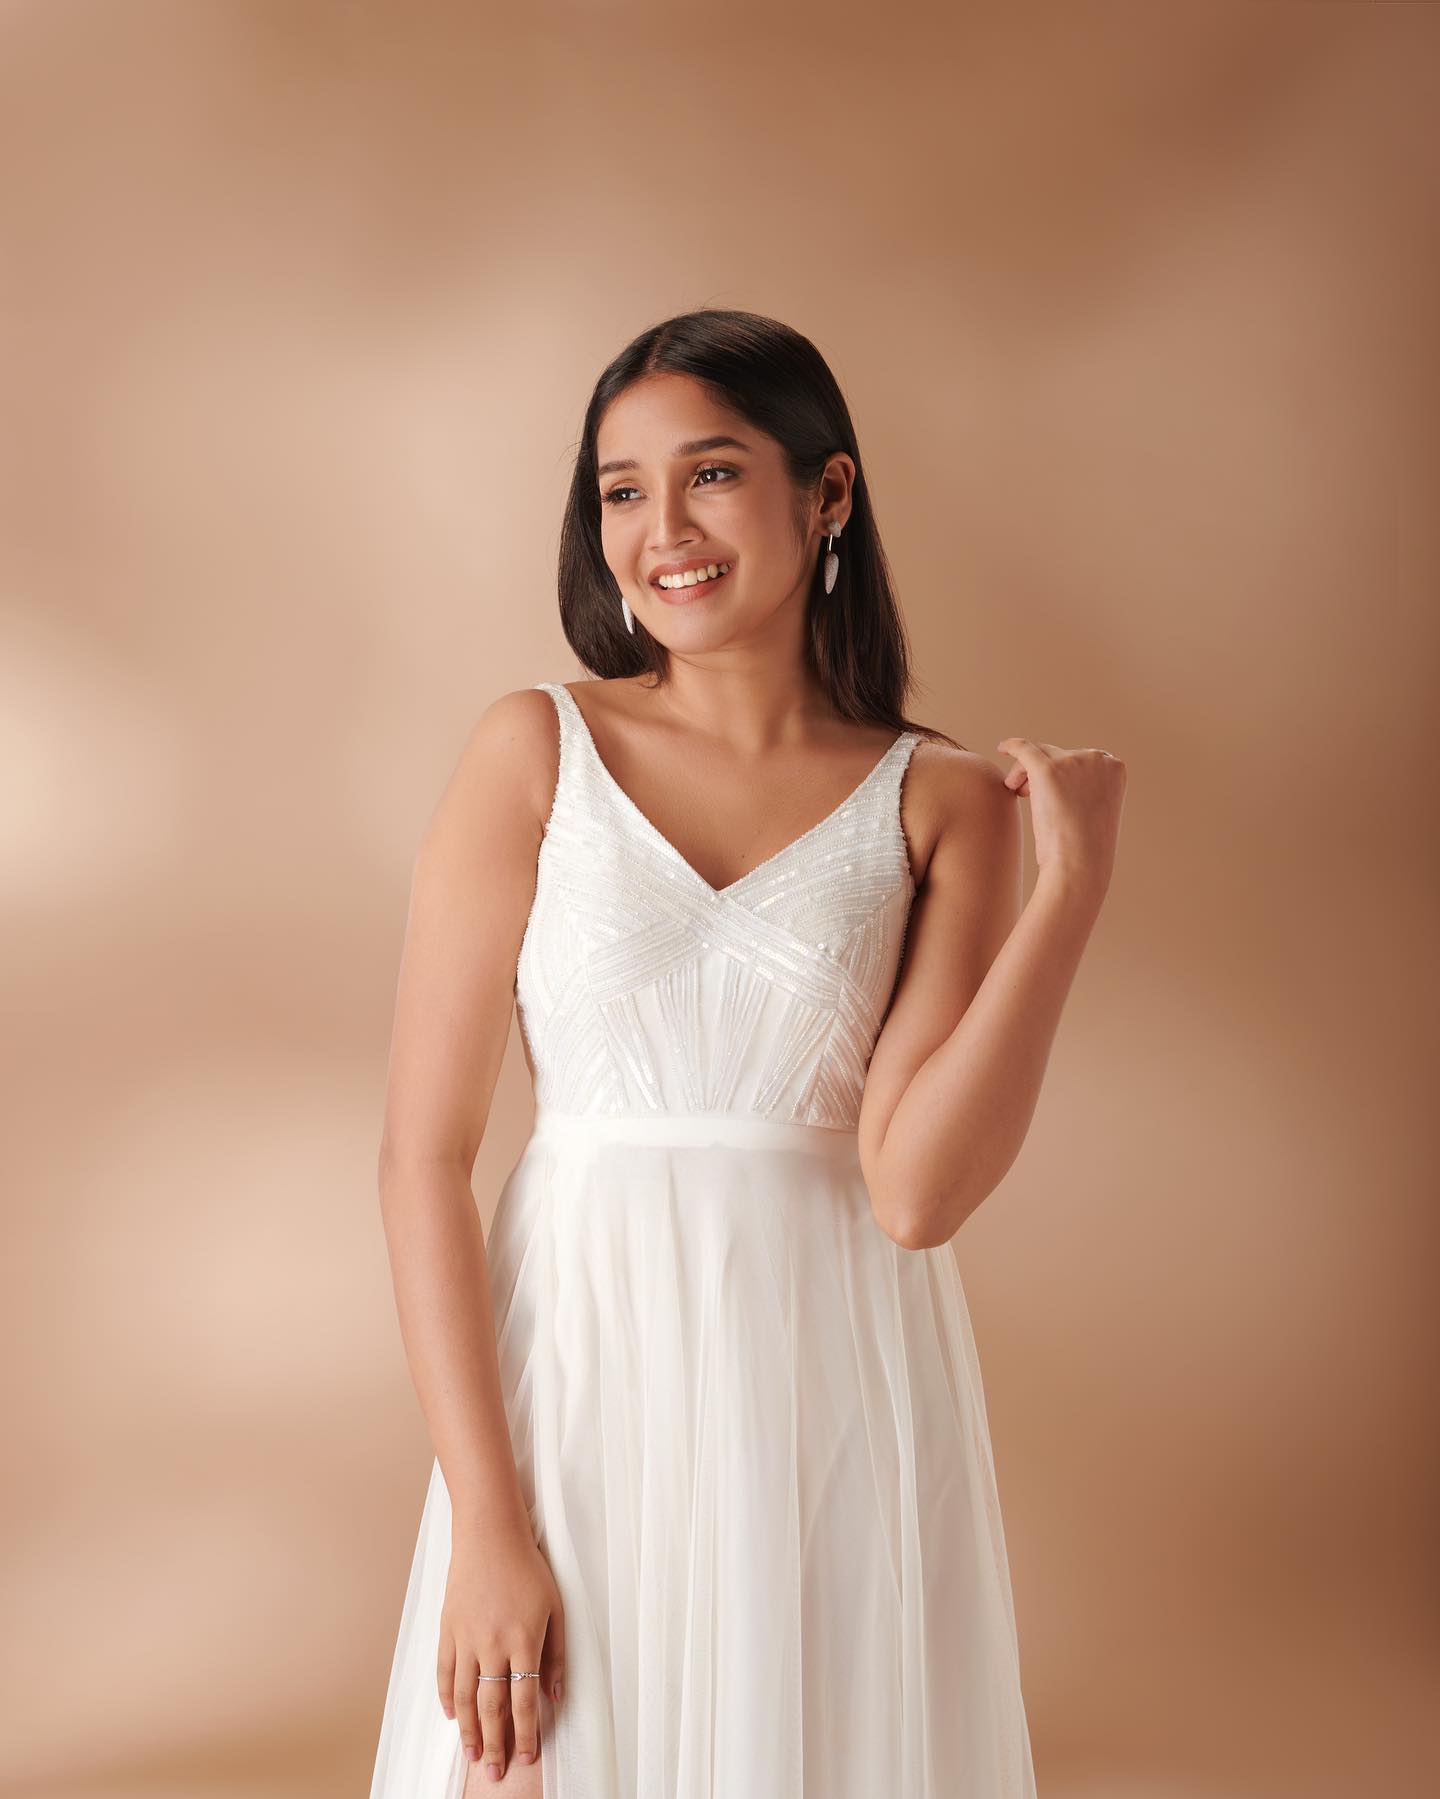 anikha-surendran-in-white-sleeveless-gown-dress-images-004